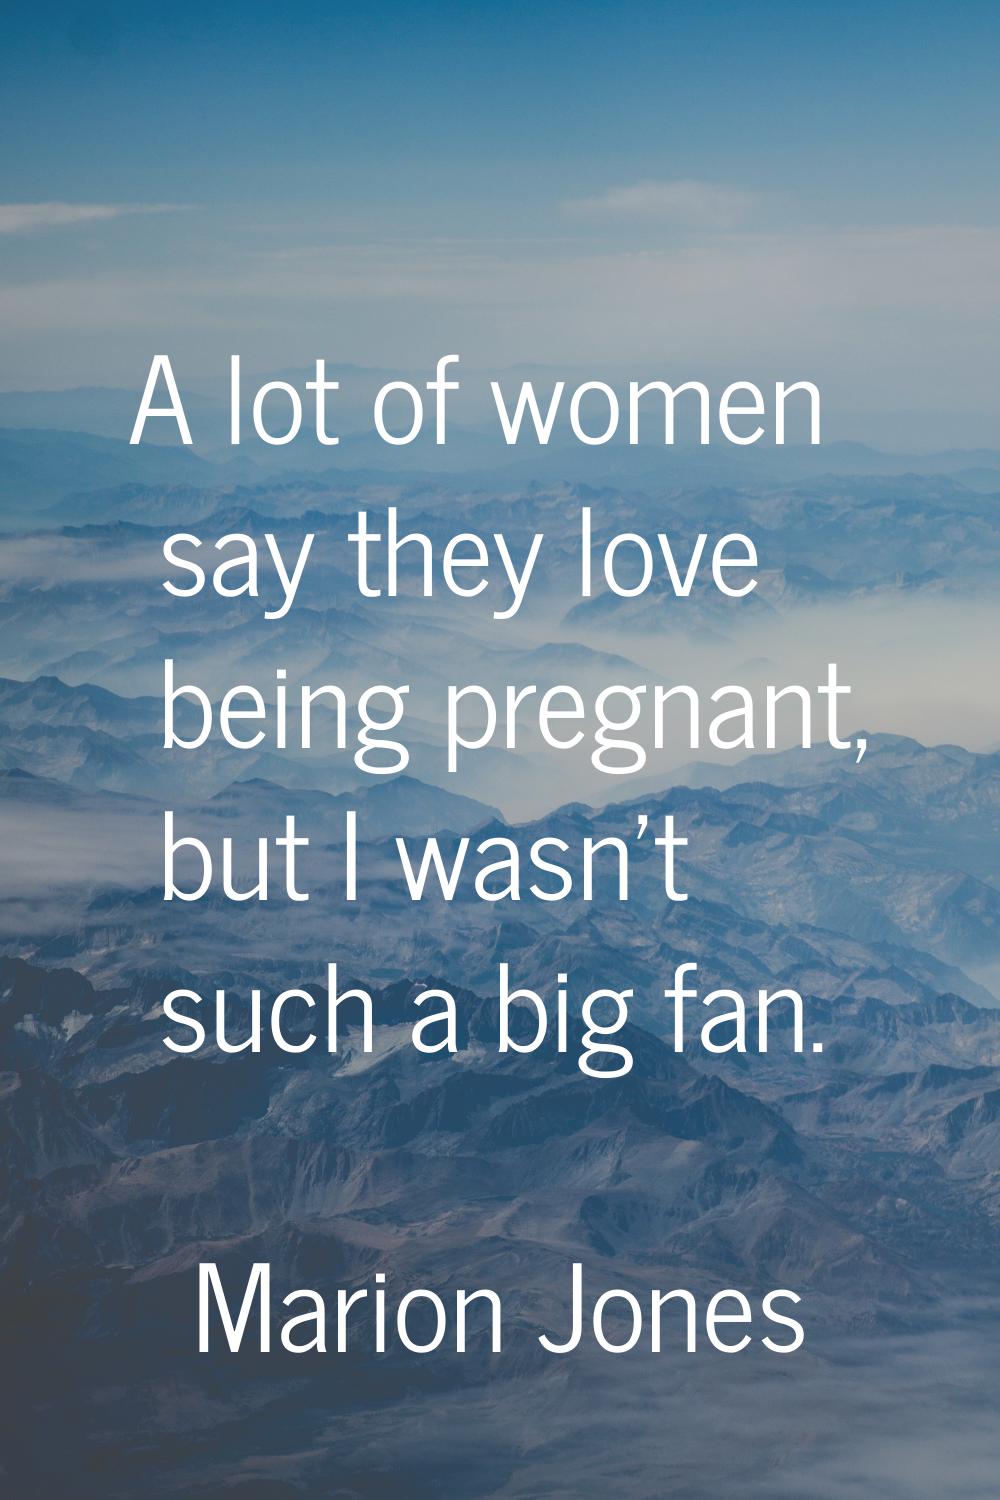 A lot of women say they love being pregnant, but I wasn't such a big fan.